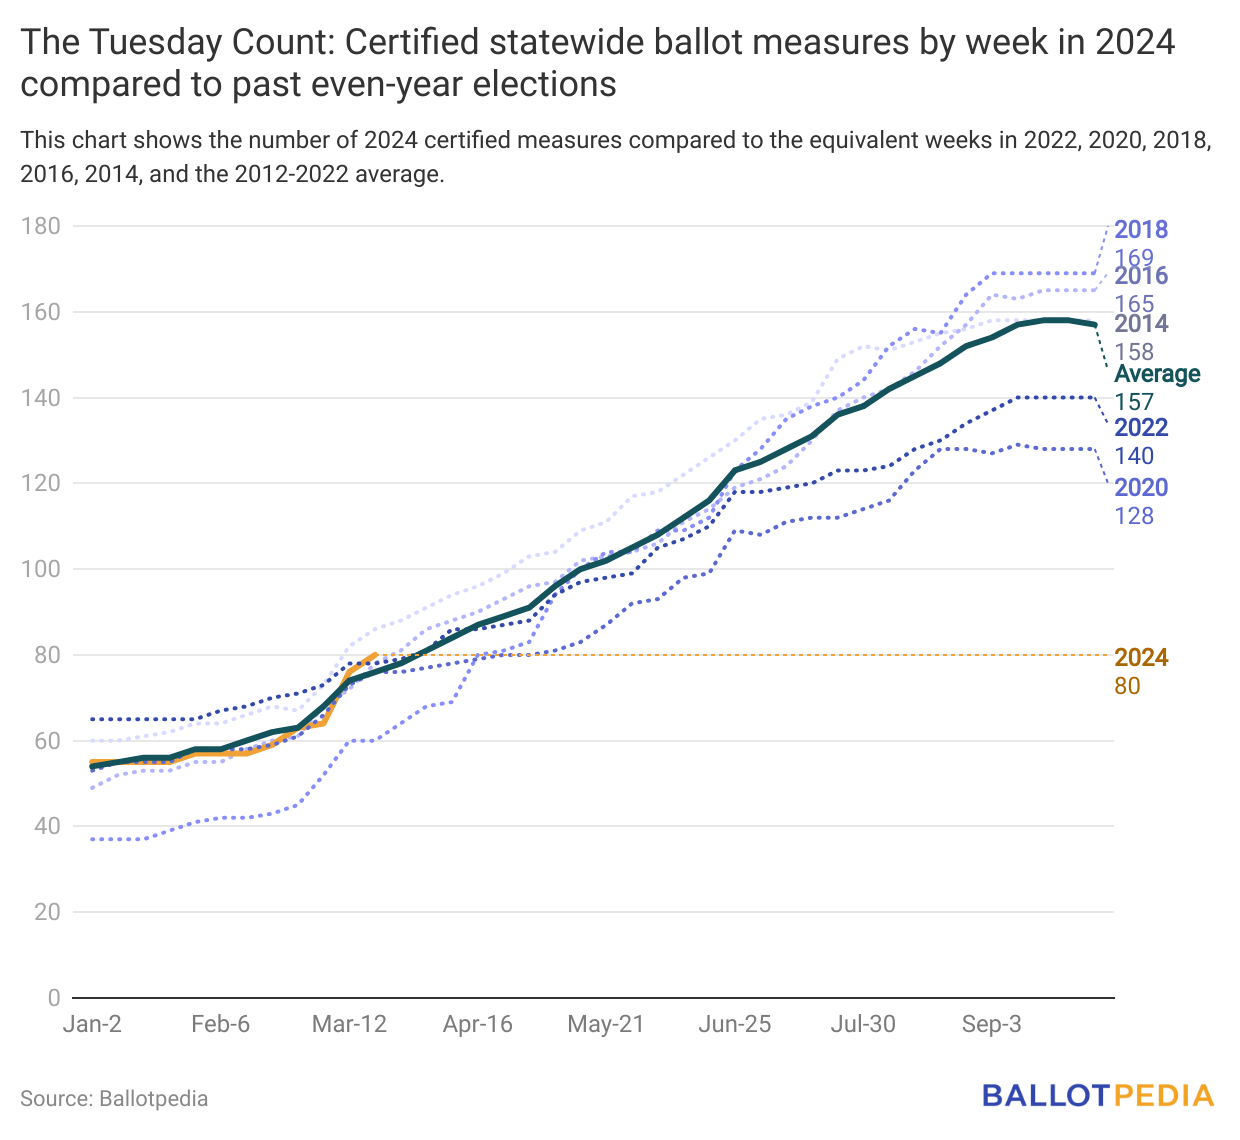 The latest 2024 state ballot measures -- 16 new measures certified in March